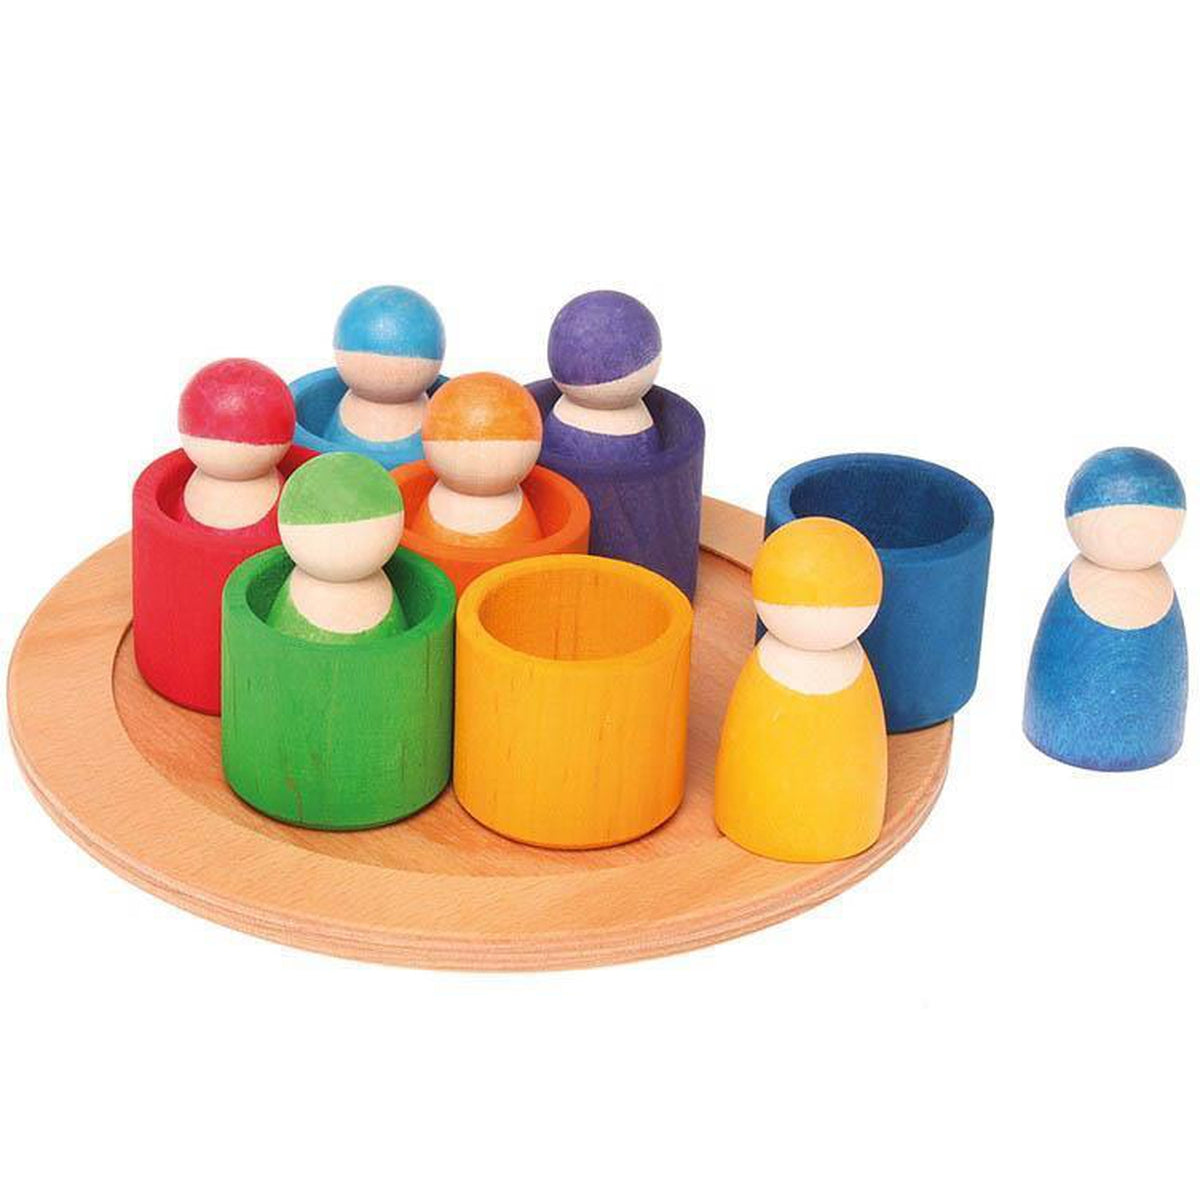 Play Figures for 2 Year Olds